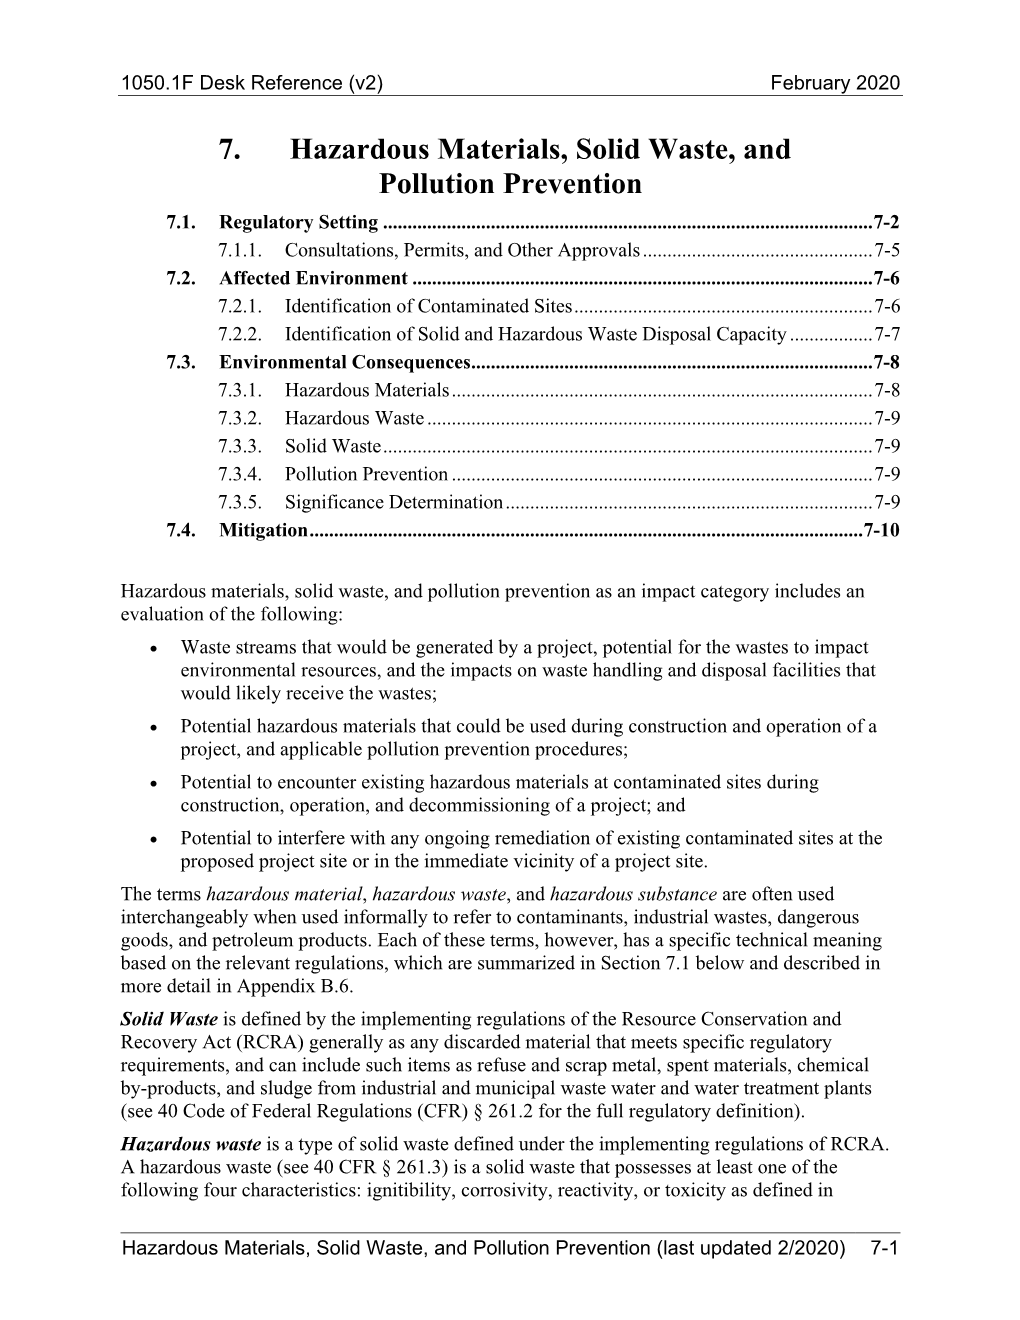 Chapter 7. Hazardous Materials, Solid Waste, and Pollution Prevention – February 2020